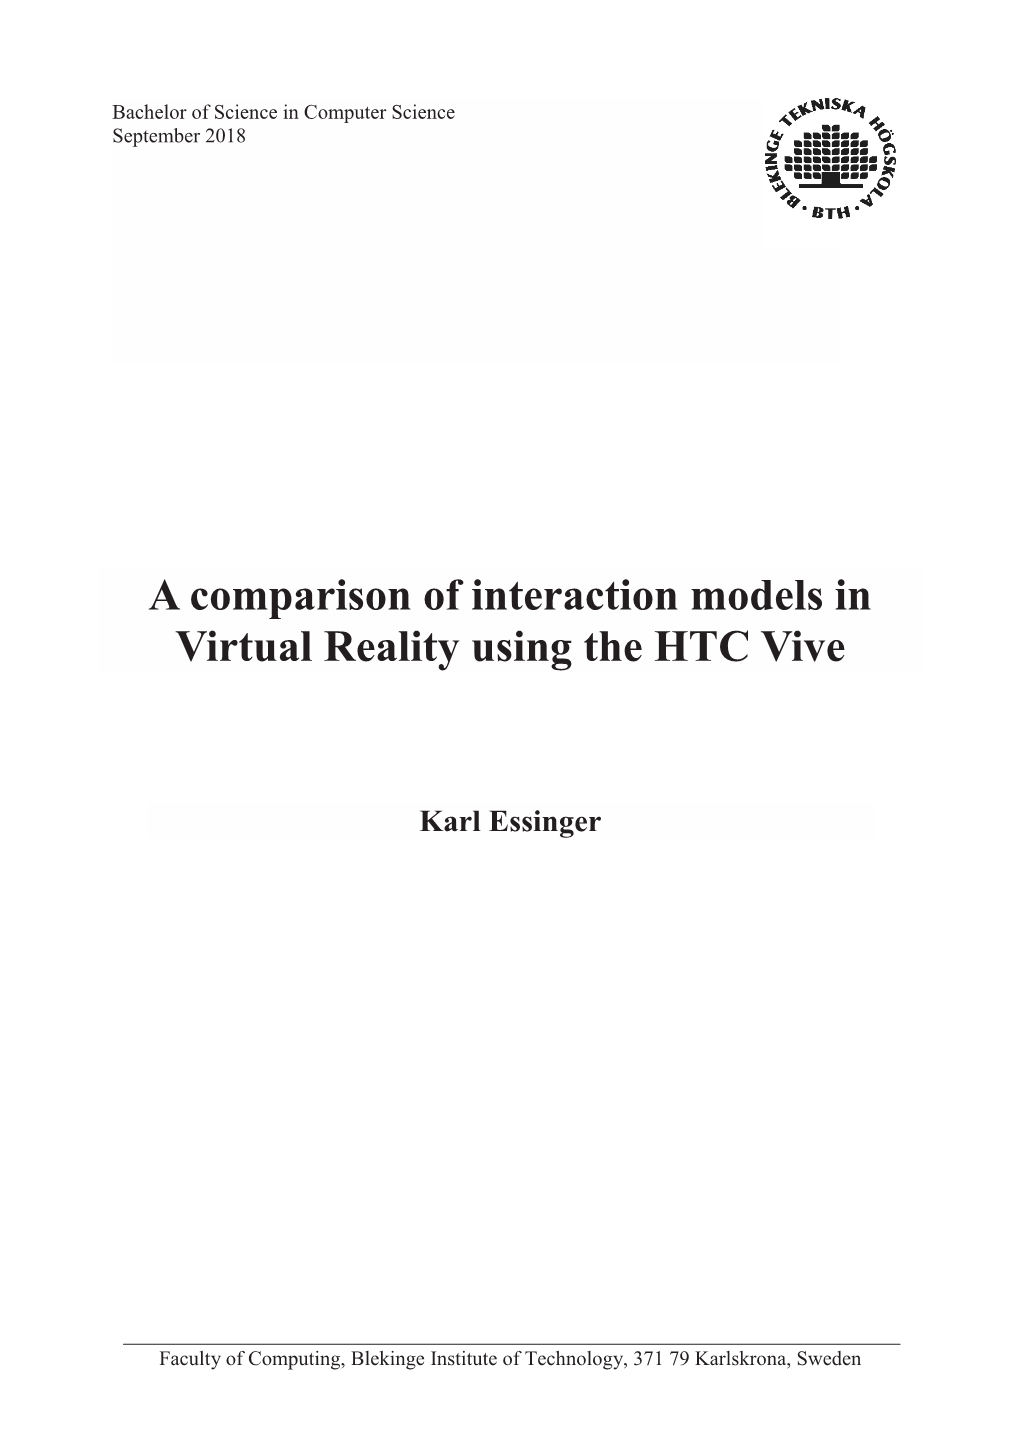 A Comparison of Interaction Models in Virtual Reality Using the HTC Vive